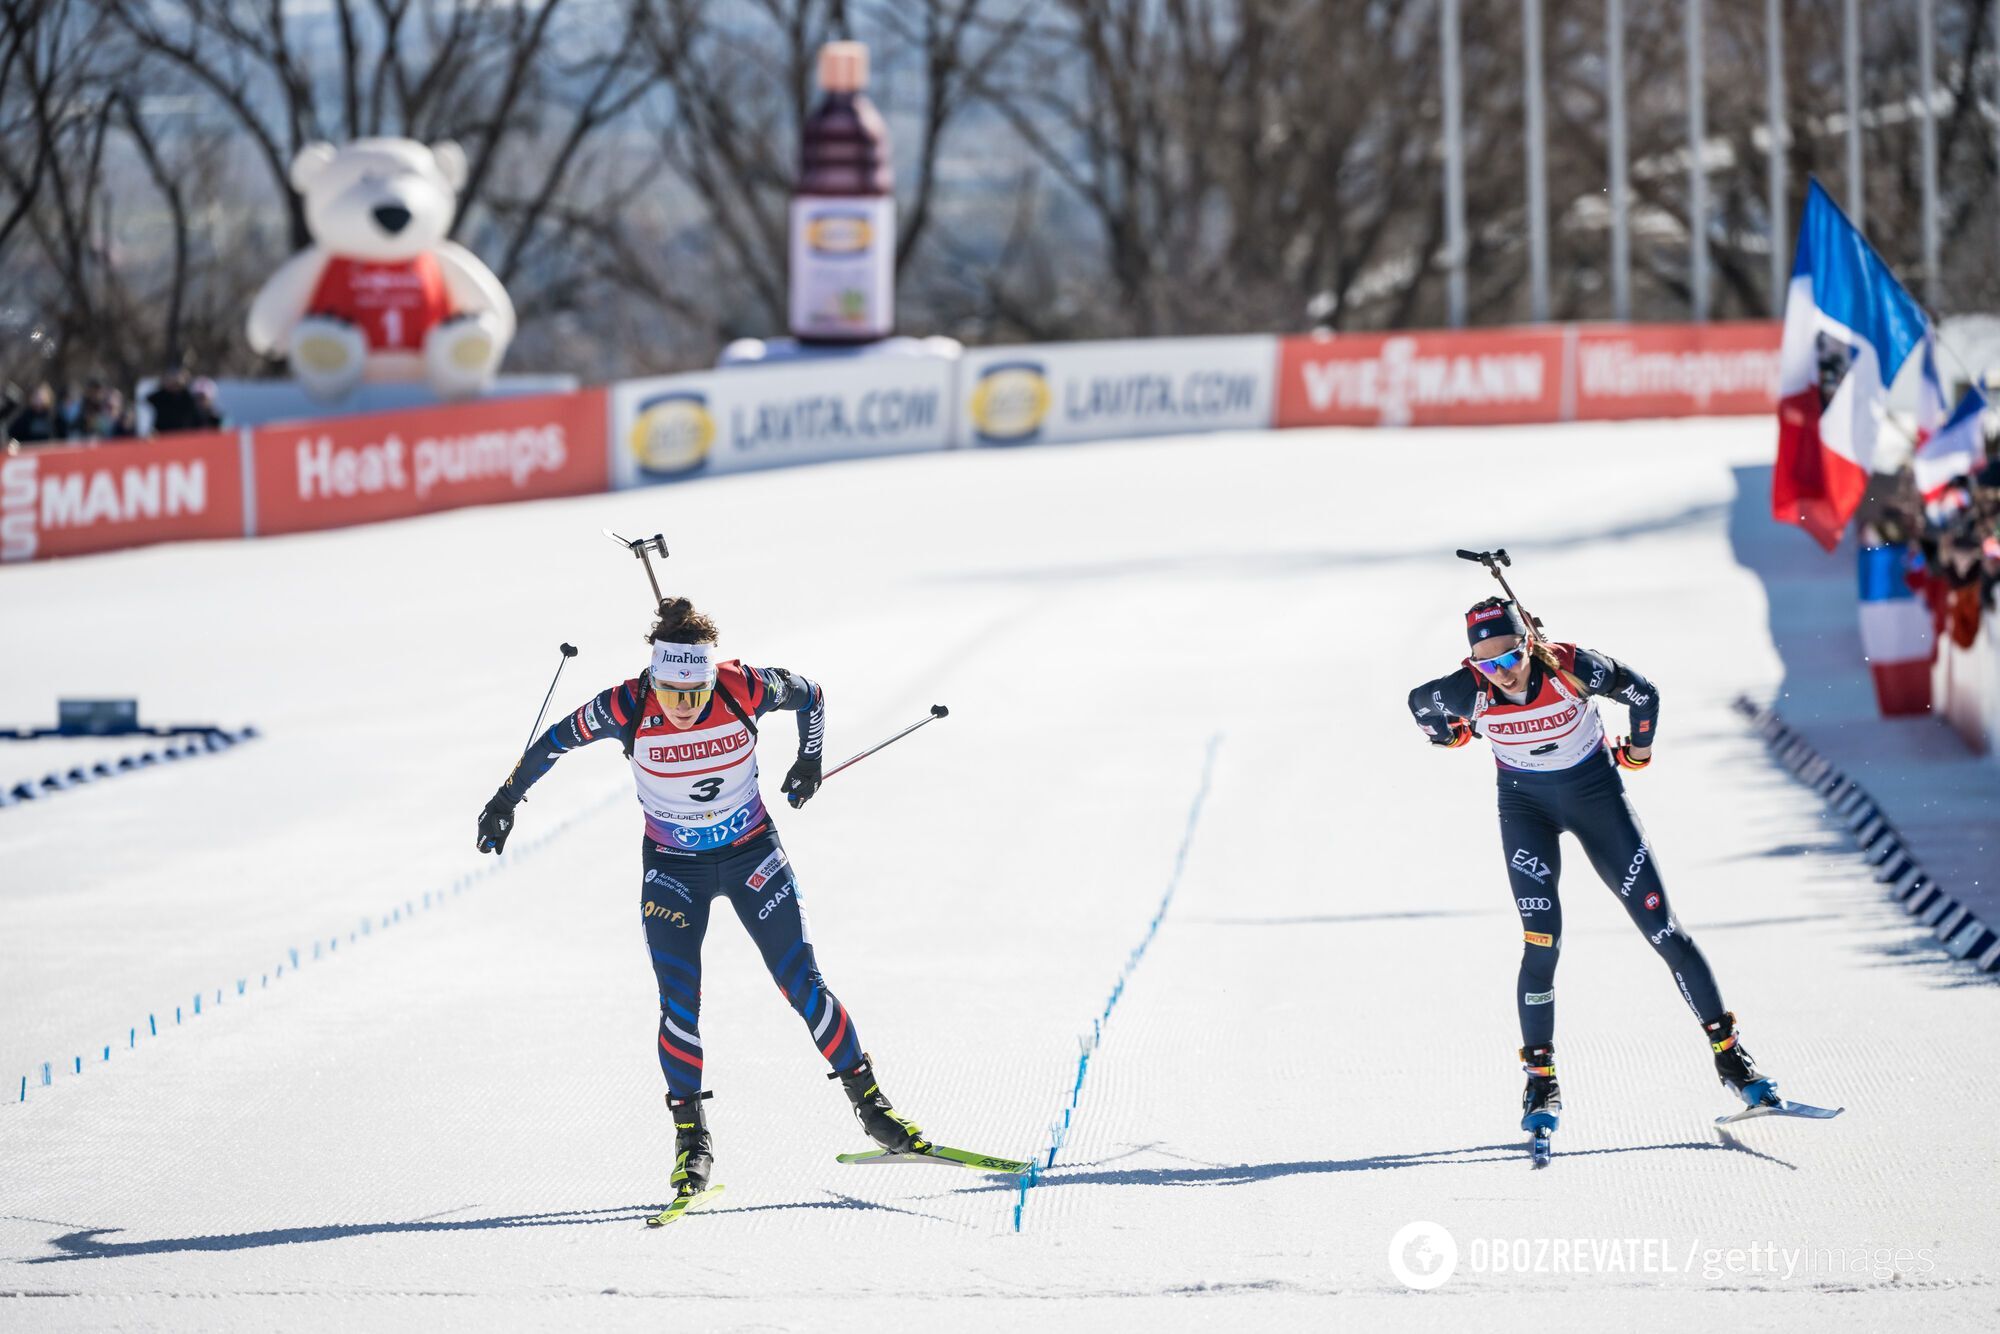 The Biathlon World Cup race was marked by an incredible denouement in the last meters. A video has been released